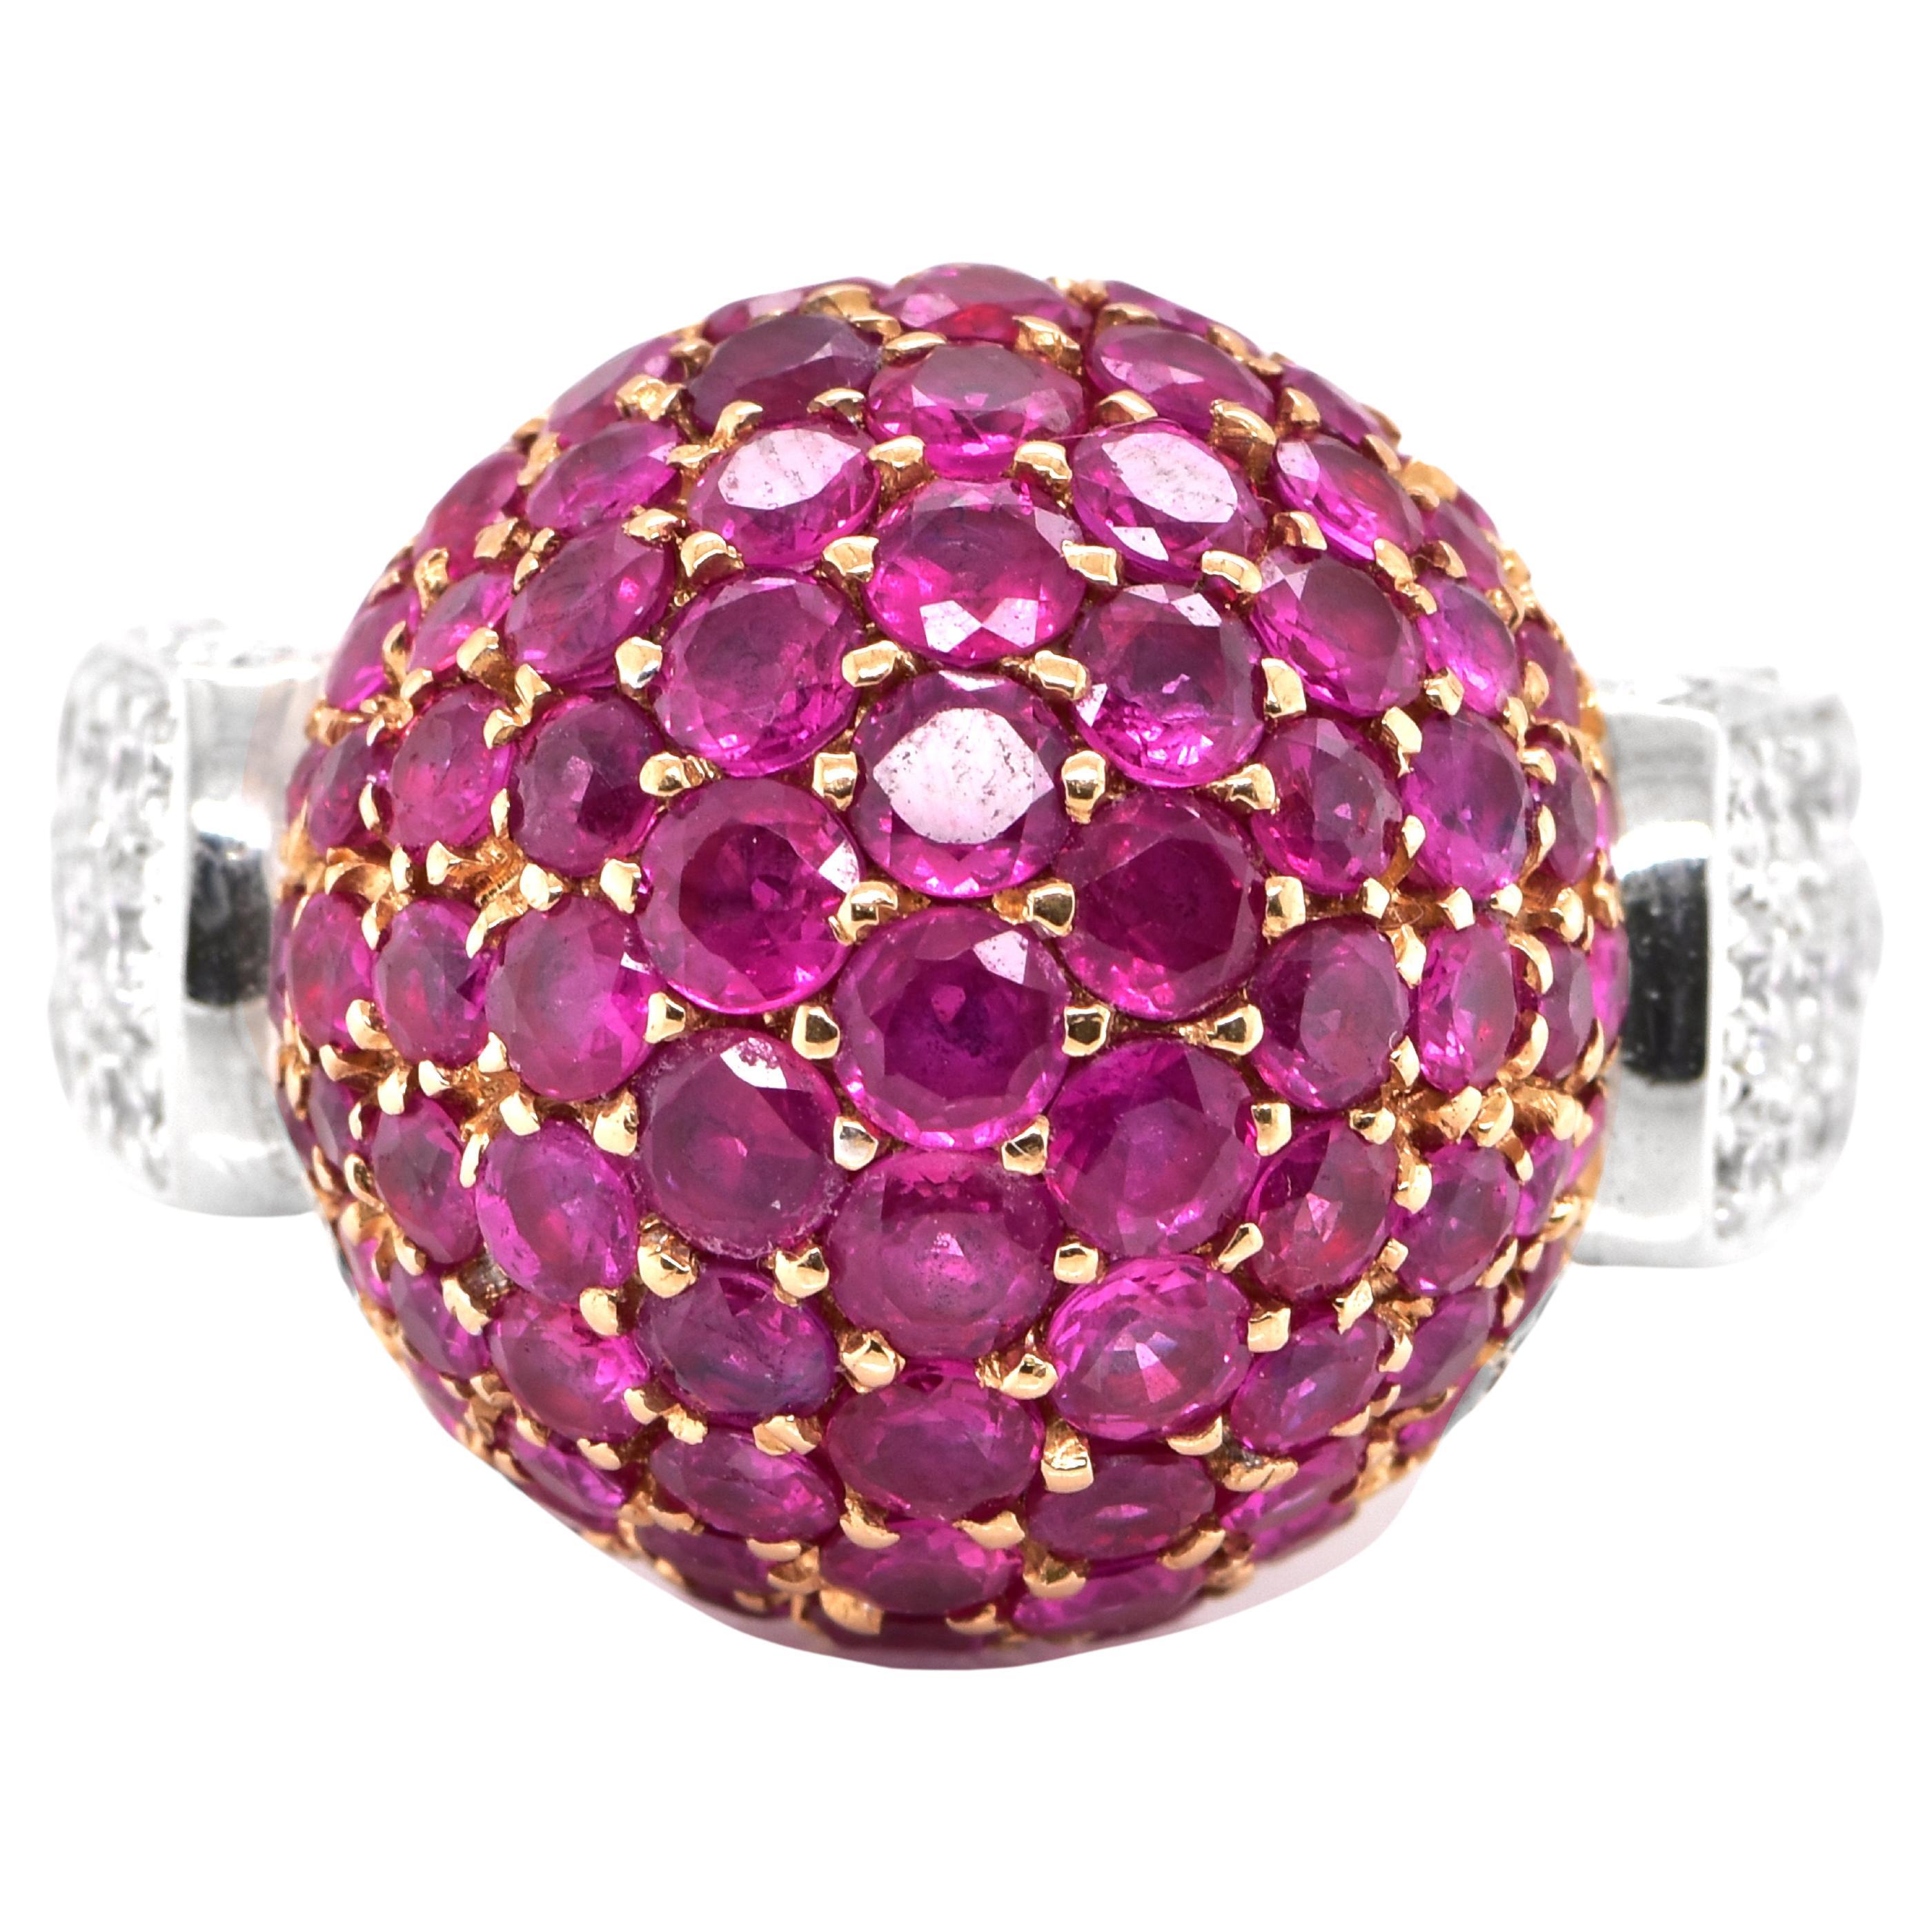 5.86 Carat Ruby and Diamond Cocktail Ring Made in 18 Karat Gold For Sale